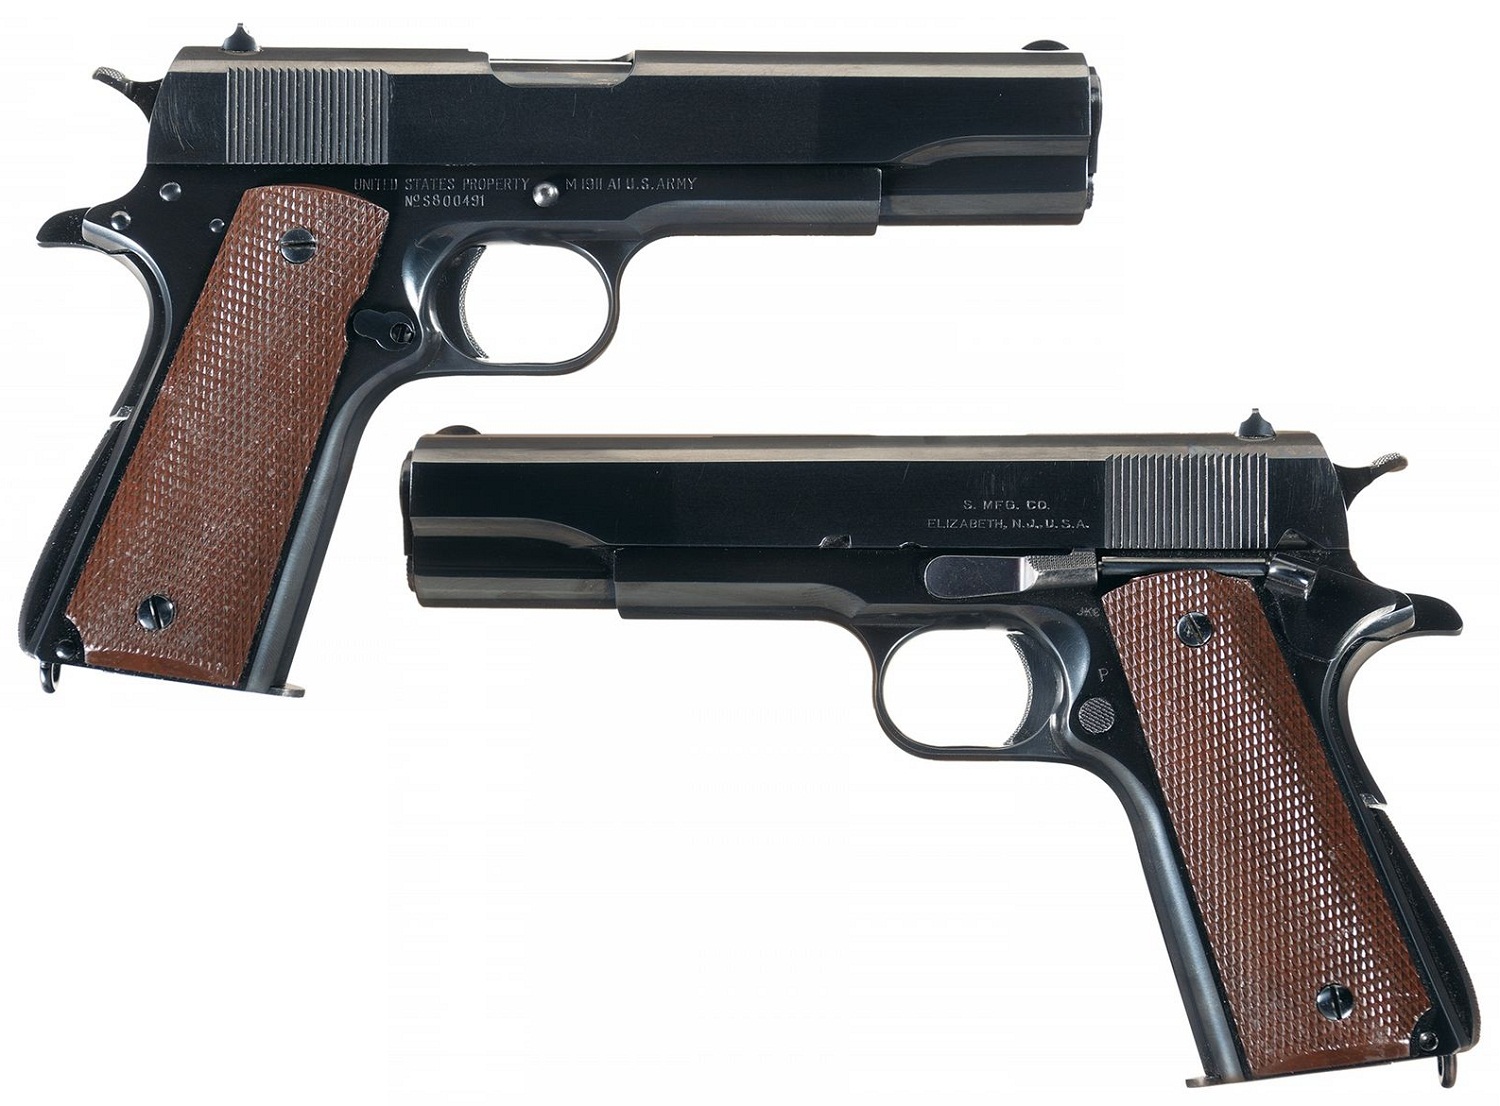 Model 1911A1 Singer Manufacturing Company